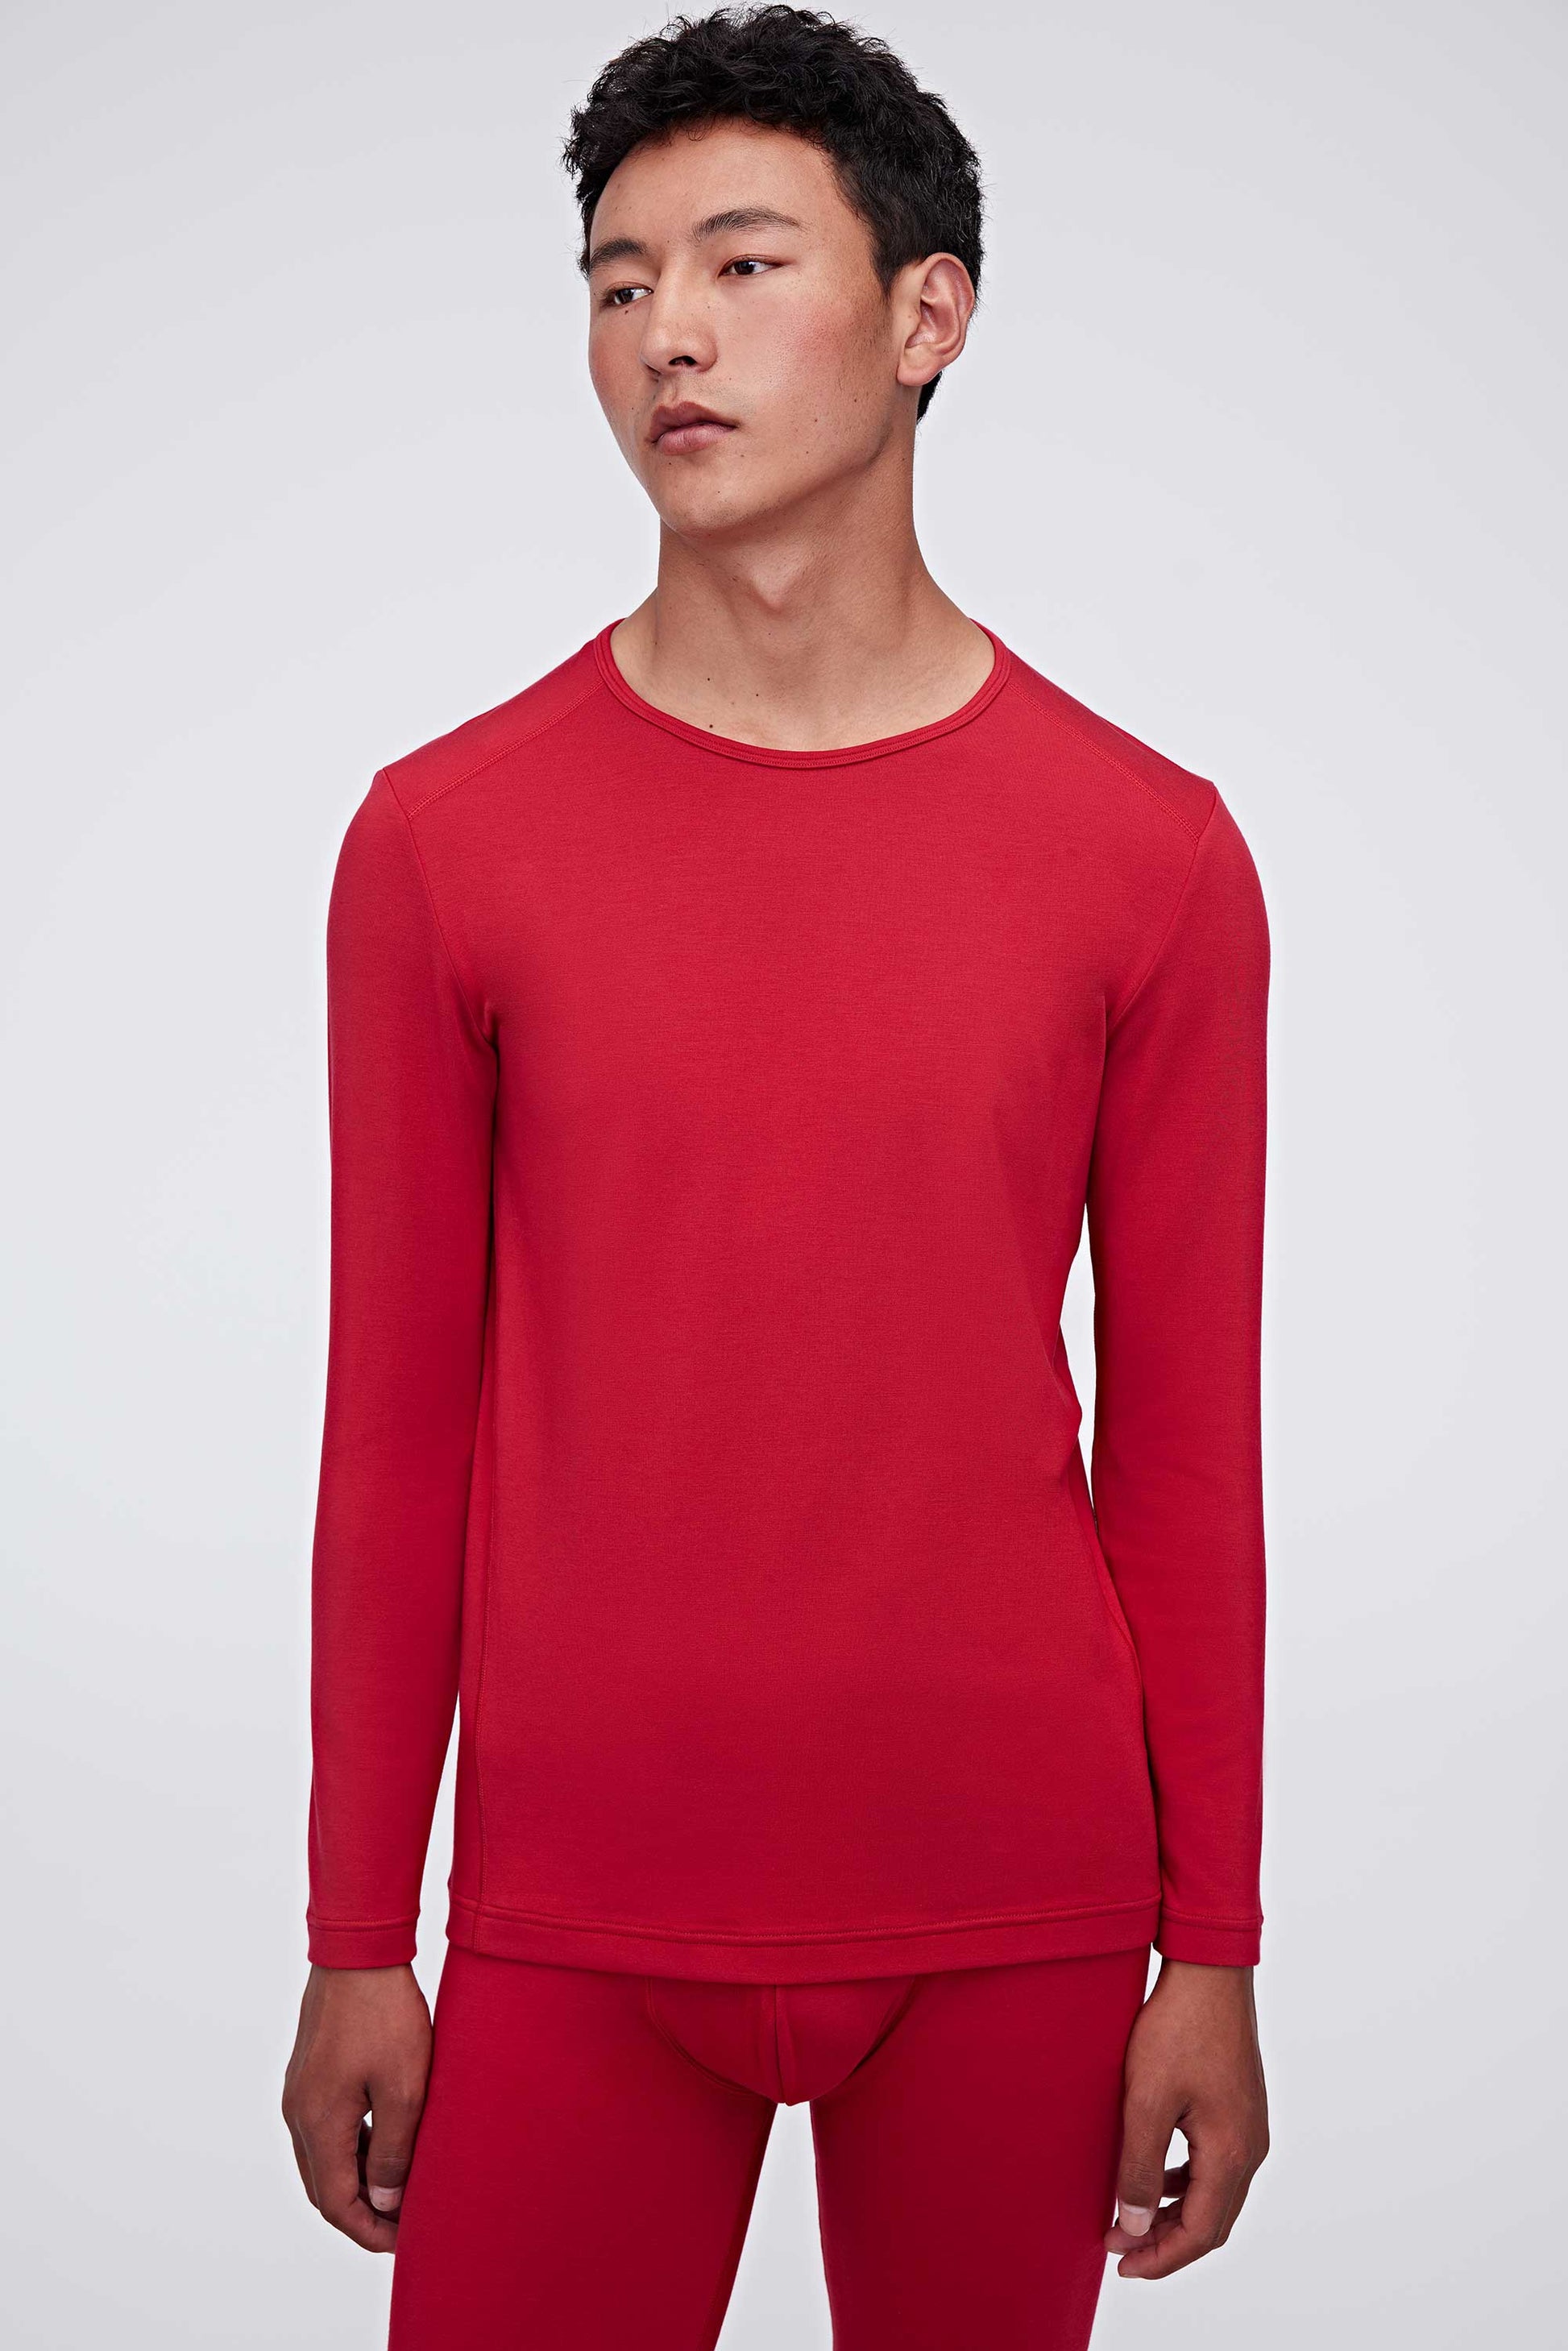 a red thermal top